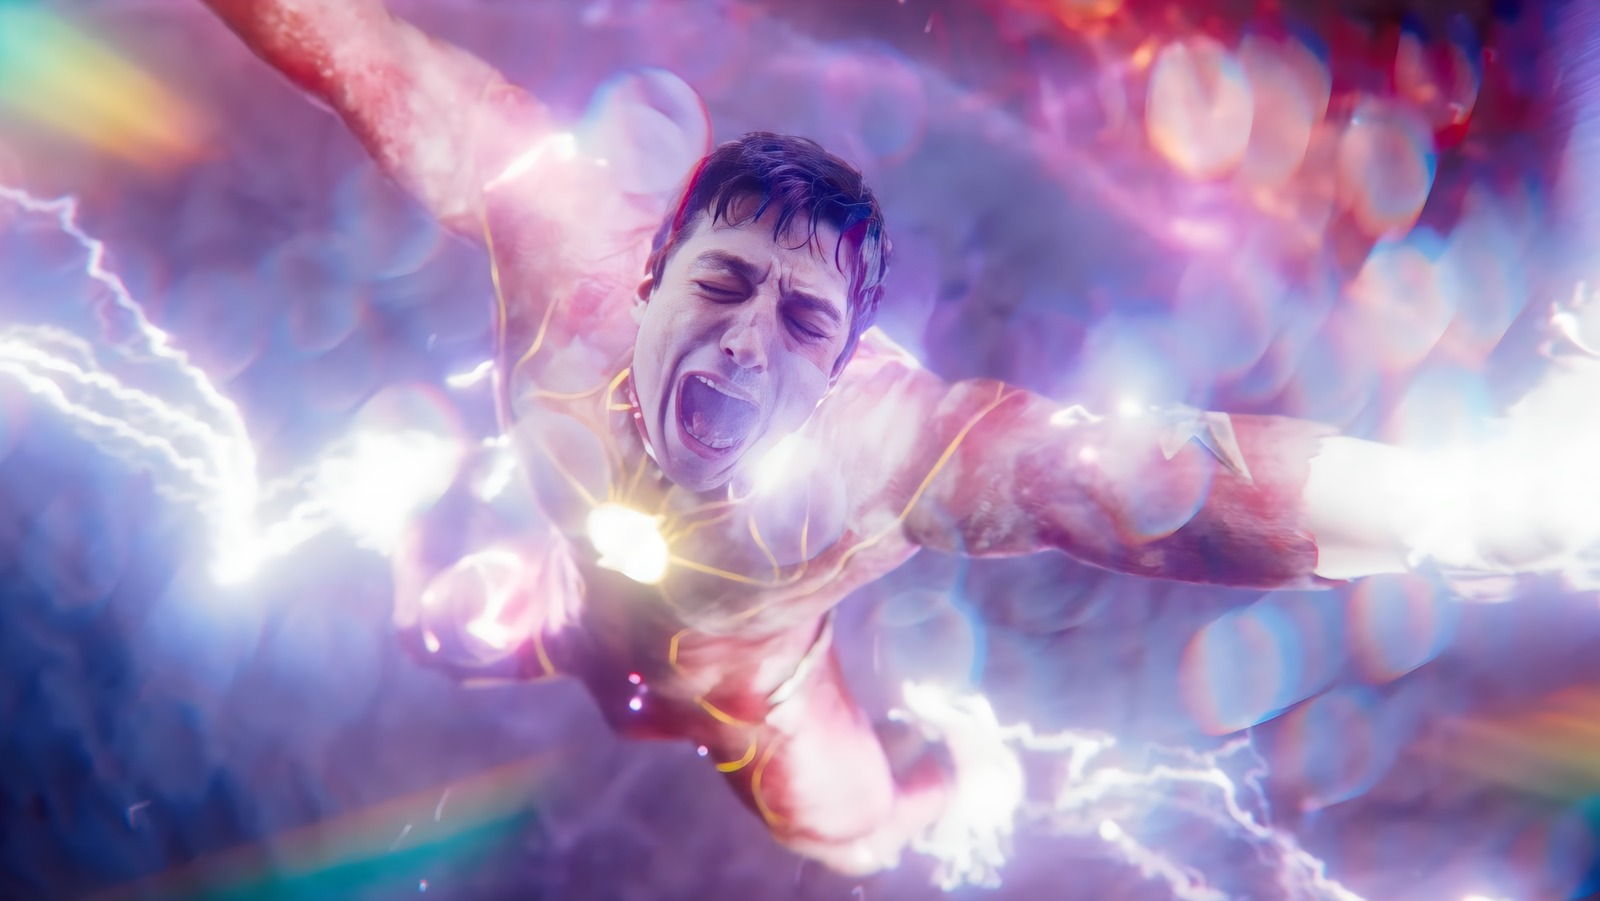 The Flash' Review - Ezra Miller Allegations Hard to Ignore